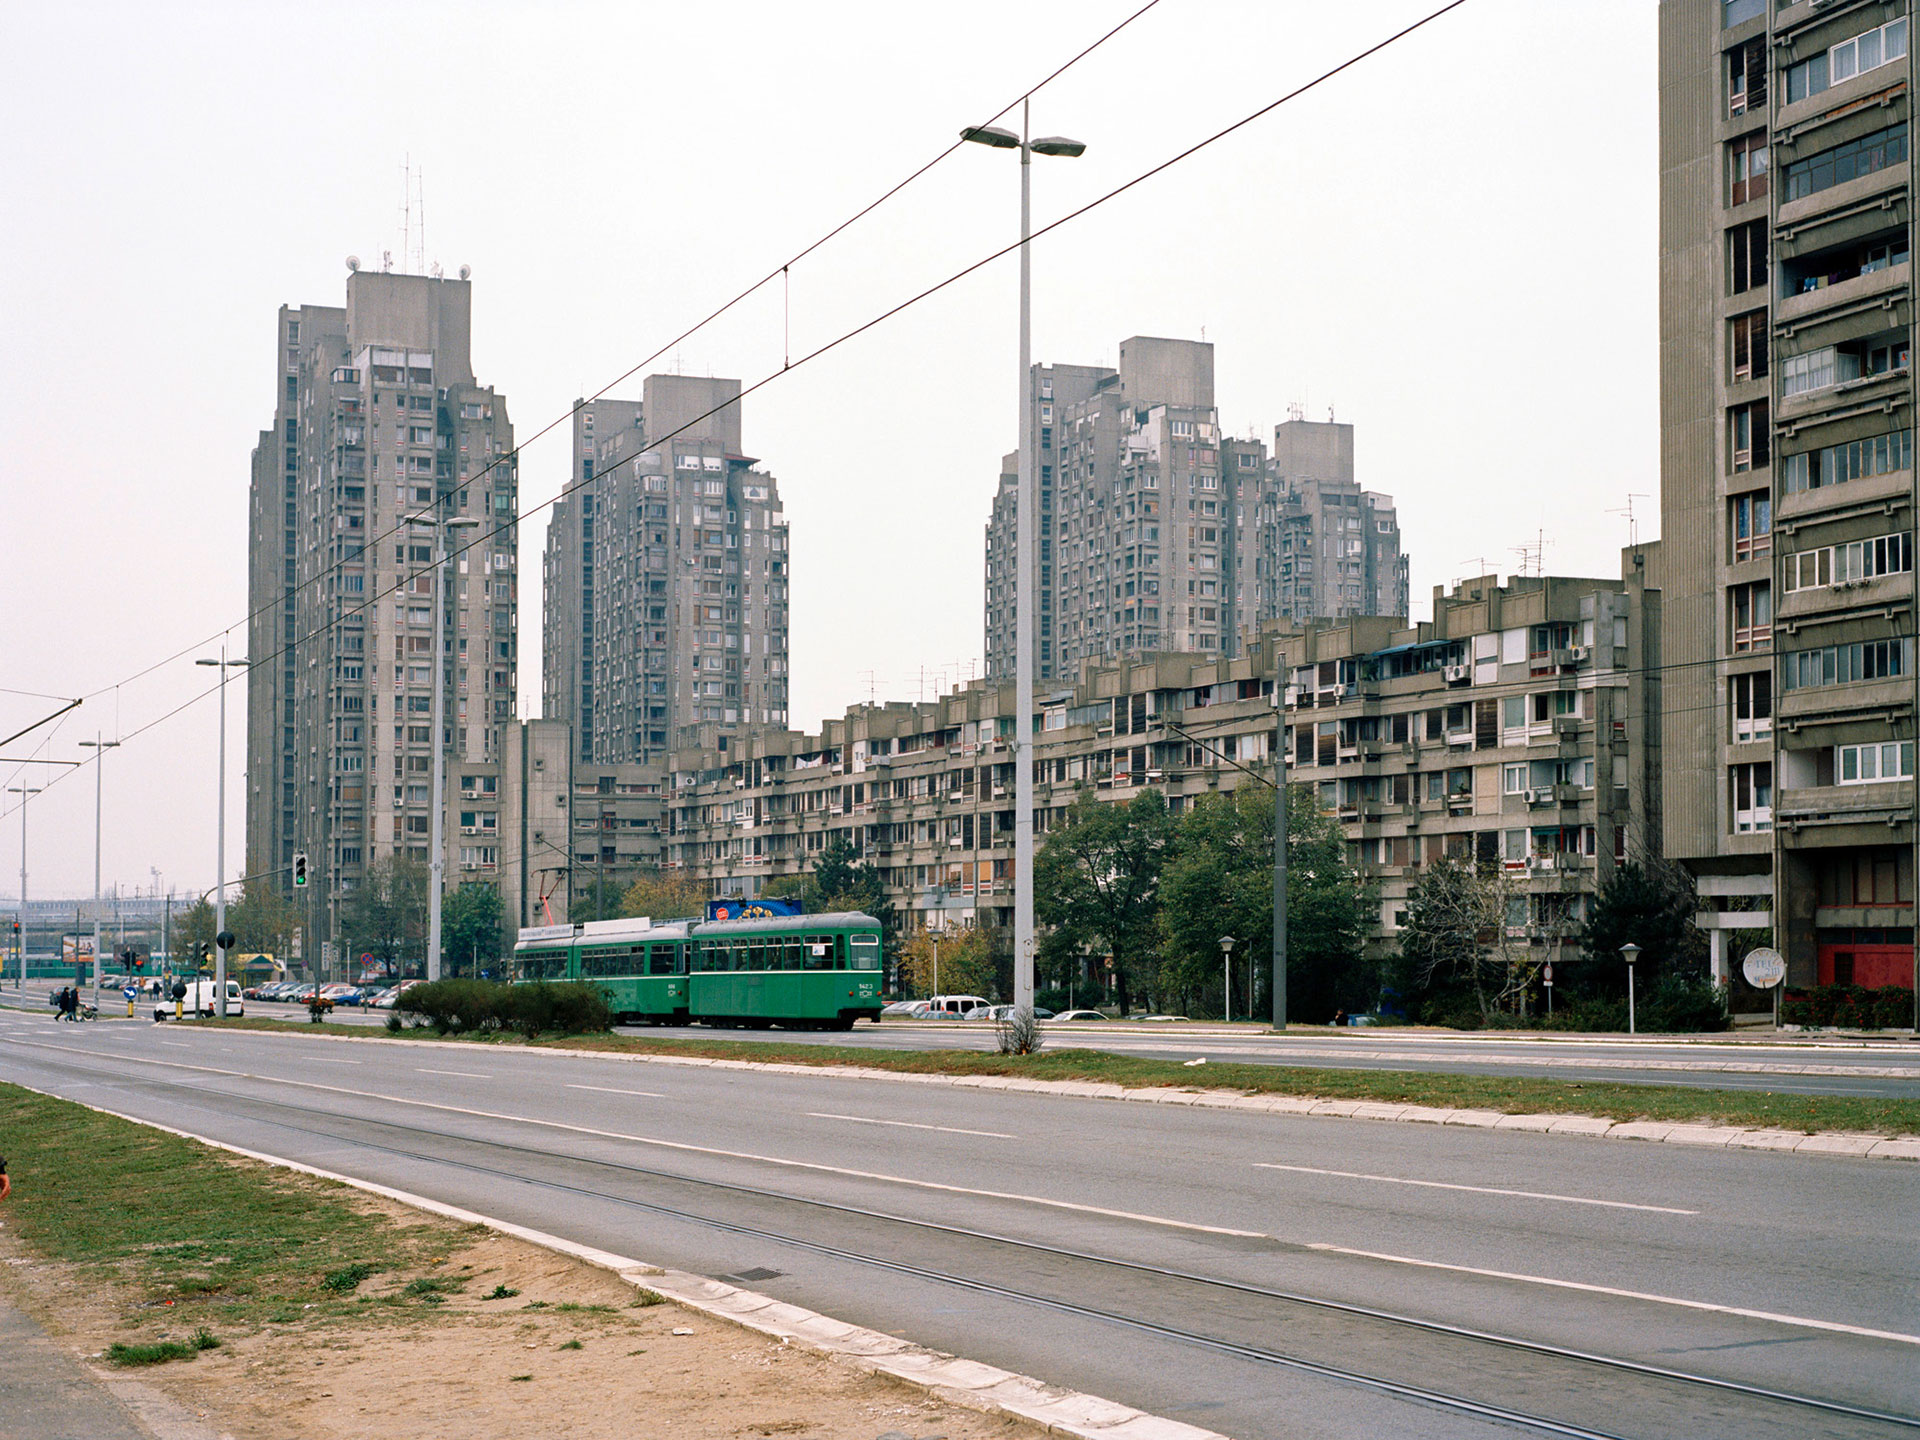 Power structure: why the architecture of the eastern bloc still looms large after communism